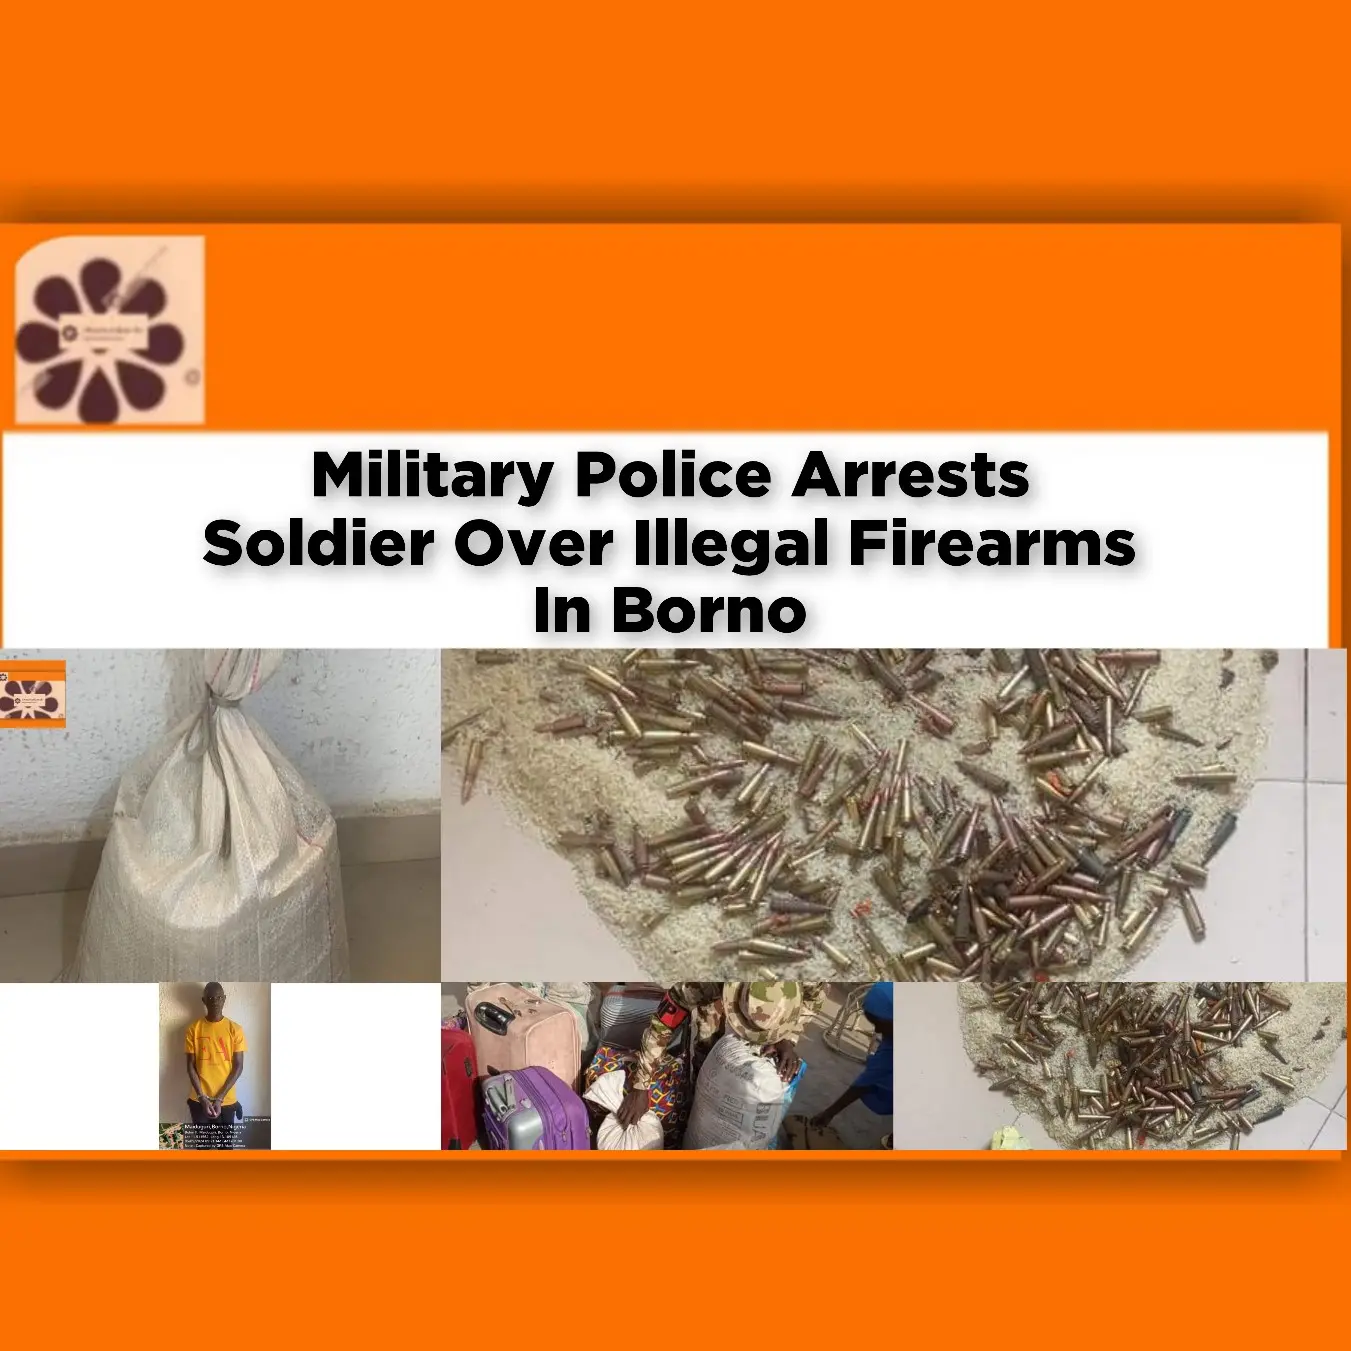 Military Police Arrests Soldier Over Illegal Firearms In Borno ~ OsazuwaAkonedo #Umahi